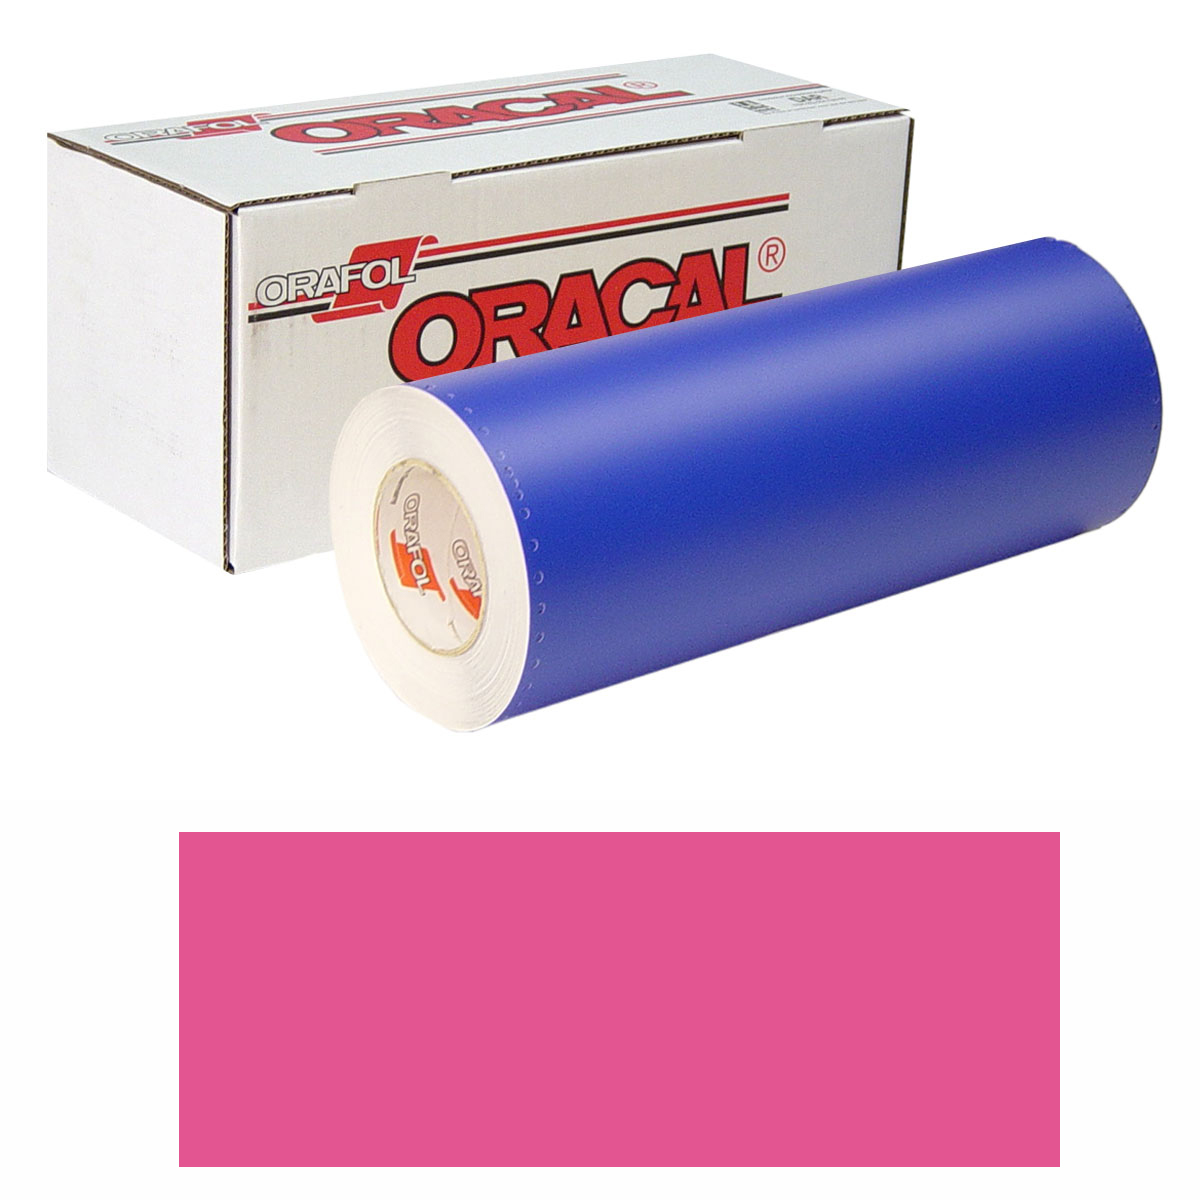 ORACAL 8300 15in X 50yd 041 Pink